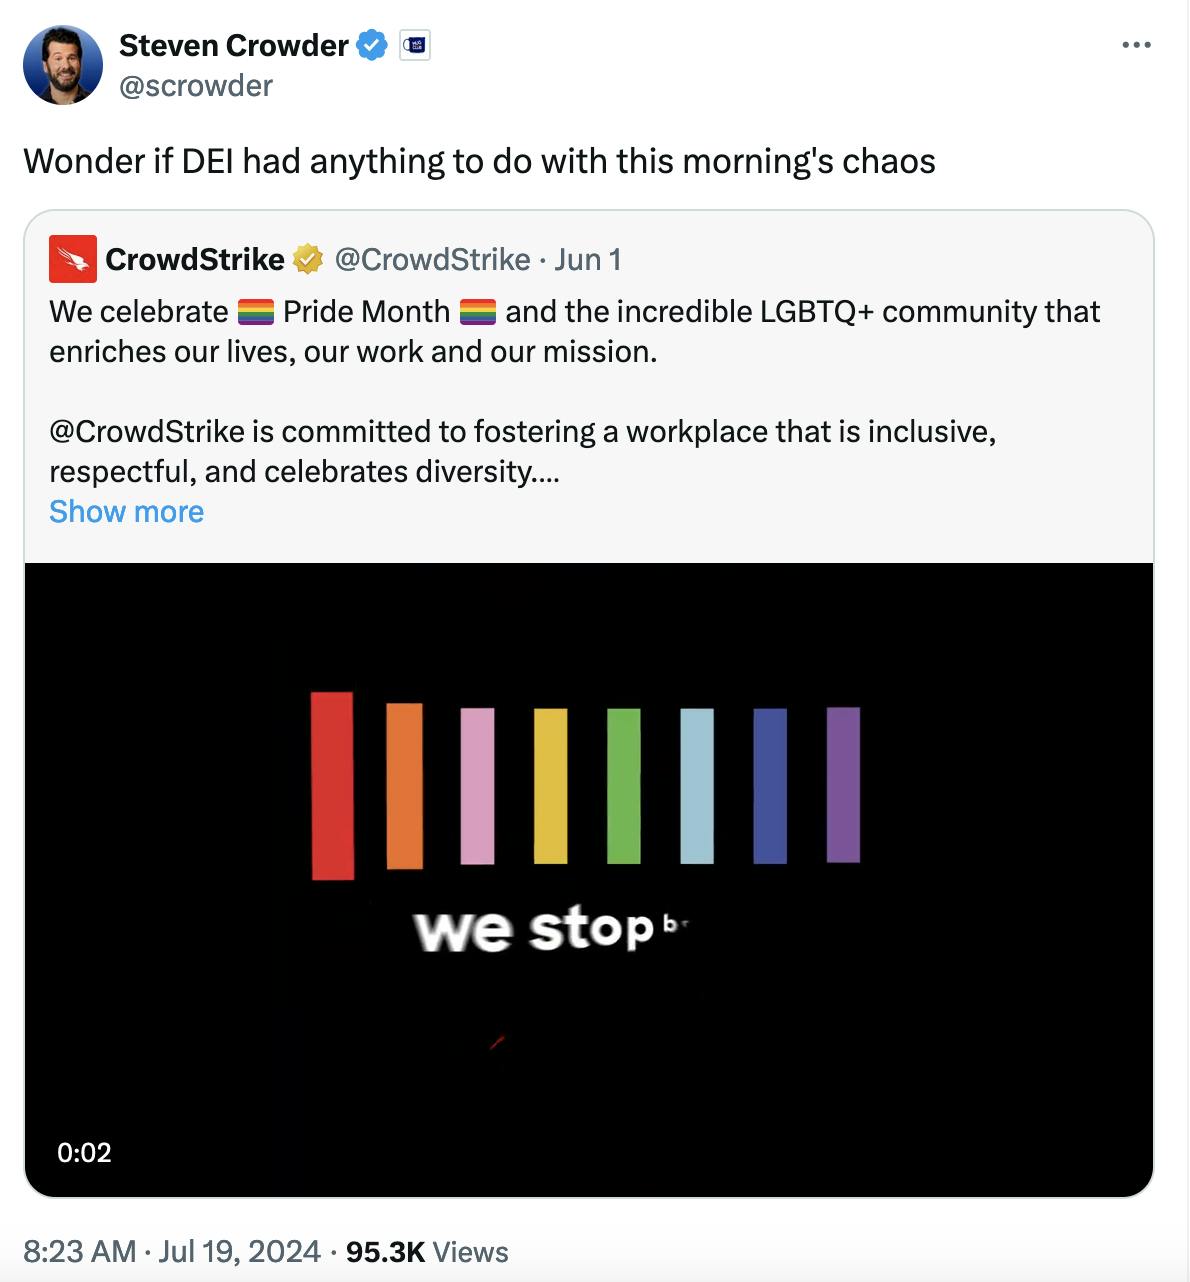 Twitter screenshot Steven Crowder @scrowder: Wonder if DEI had anything to do with this morning's chaos With a screenshot from a Crowdstrike tweet from June 1: We celebrate 🏳️‍🌈 Pride Month 🏳️‍🌈 and the incredible LGBTQ+ community that enriches our lives, our work and our mission. @CrowdStrike is committed to fostering a workplace that is inclusive, respectful, and celebrates diversity. We proudly stop breaches, together.